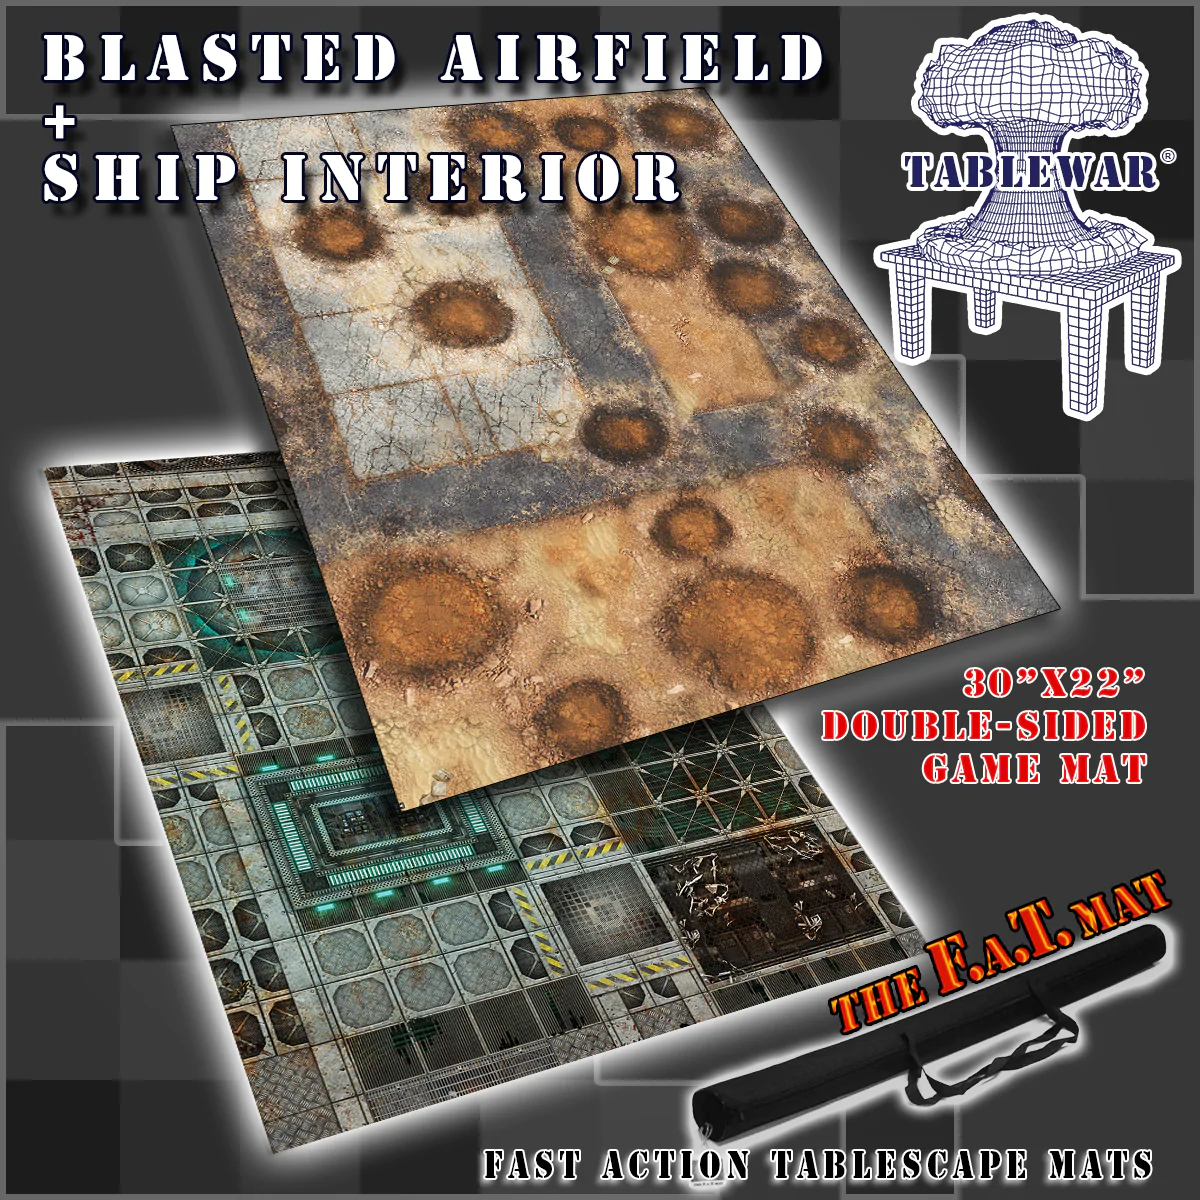 F.A.T. Mats: SHIP INTERIOR AND BLASTED AIRFIELD 30"X22" (DOUBLE SIDED) 